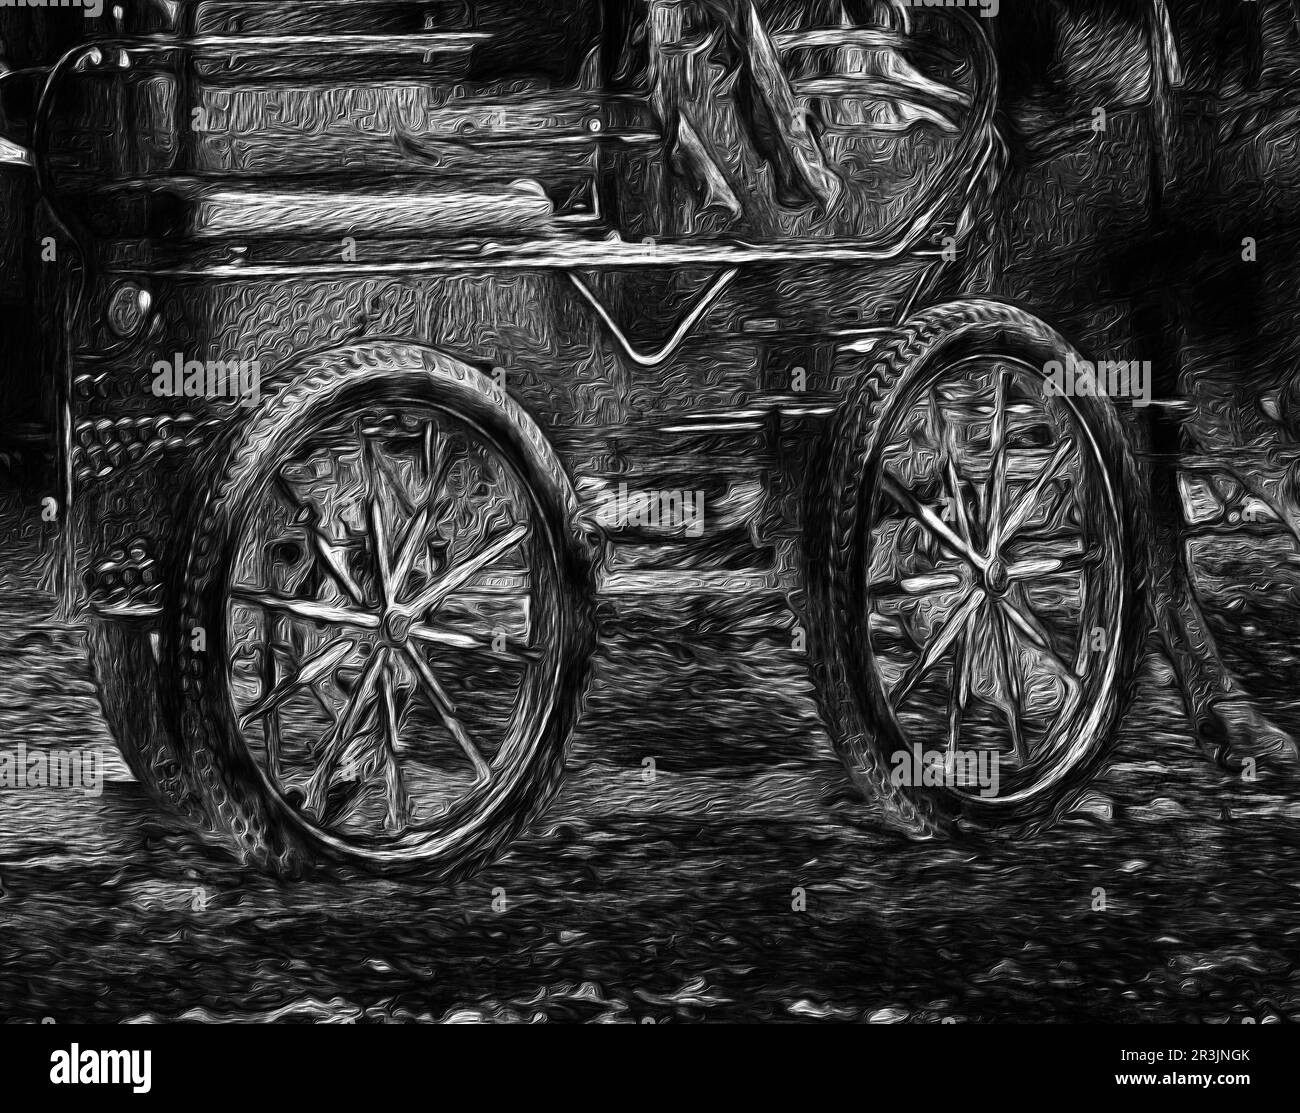 BALCK AND WHITE : HORSE CARRIAGE Stock Photo